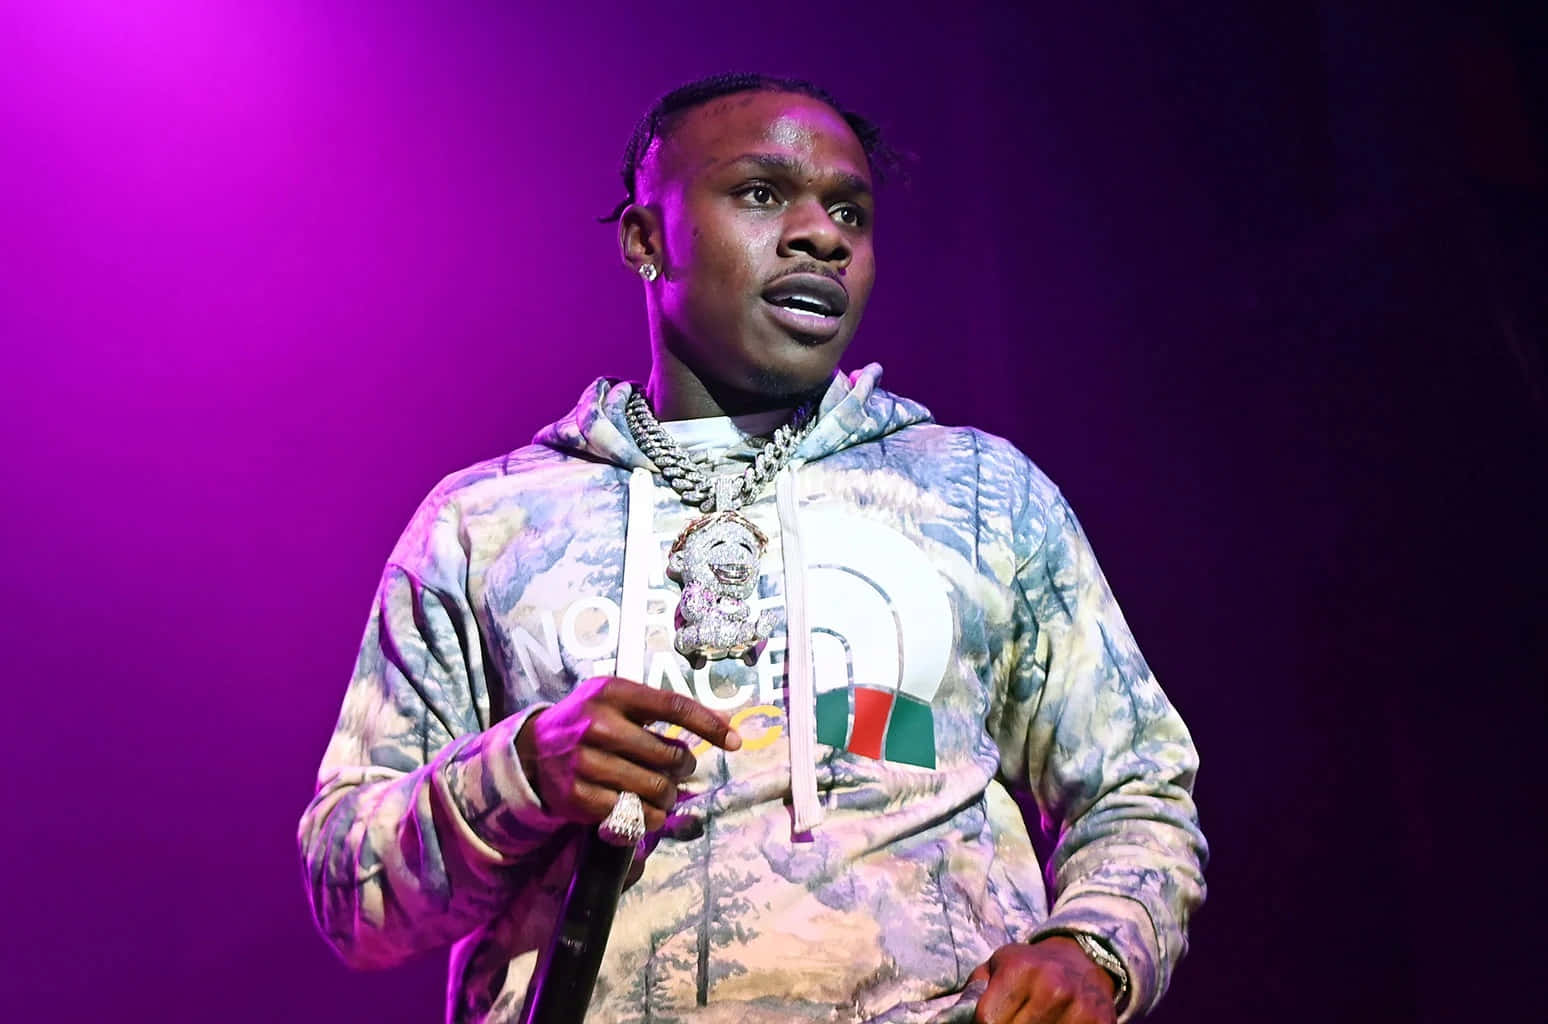 DaBaby posing in a colorful photoshoot backdrop